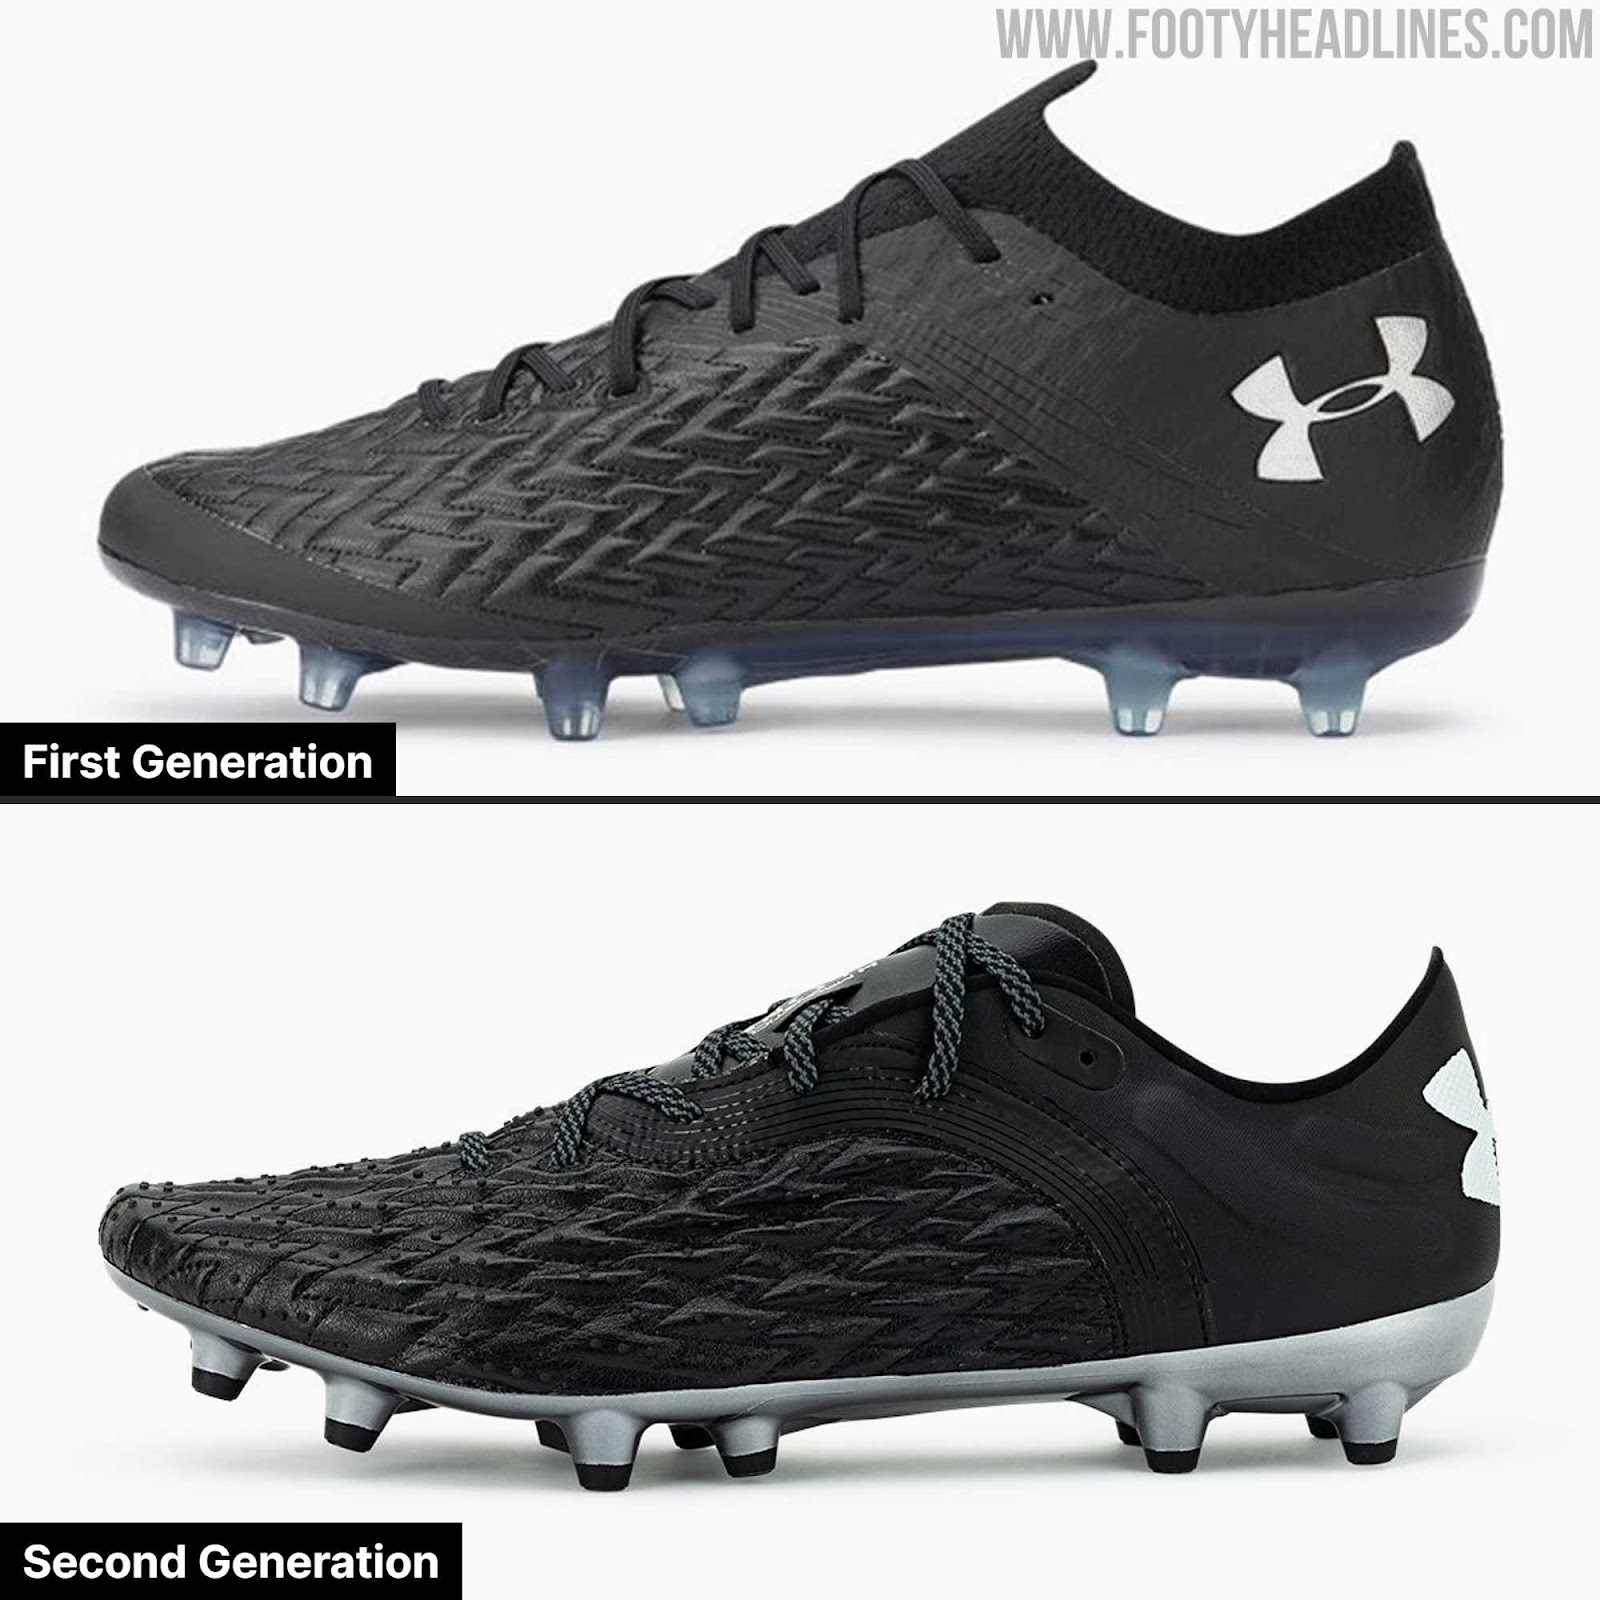 Under Armour Clone Magnetico Pro 2 2022 Boots Released - Debuted Alexander-Arnold Footy Headlines